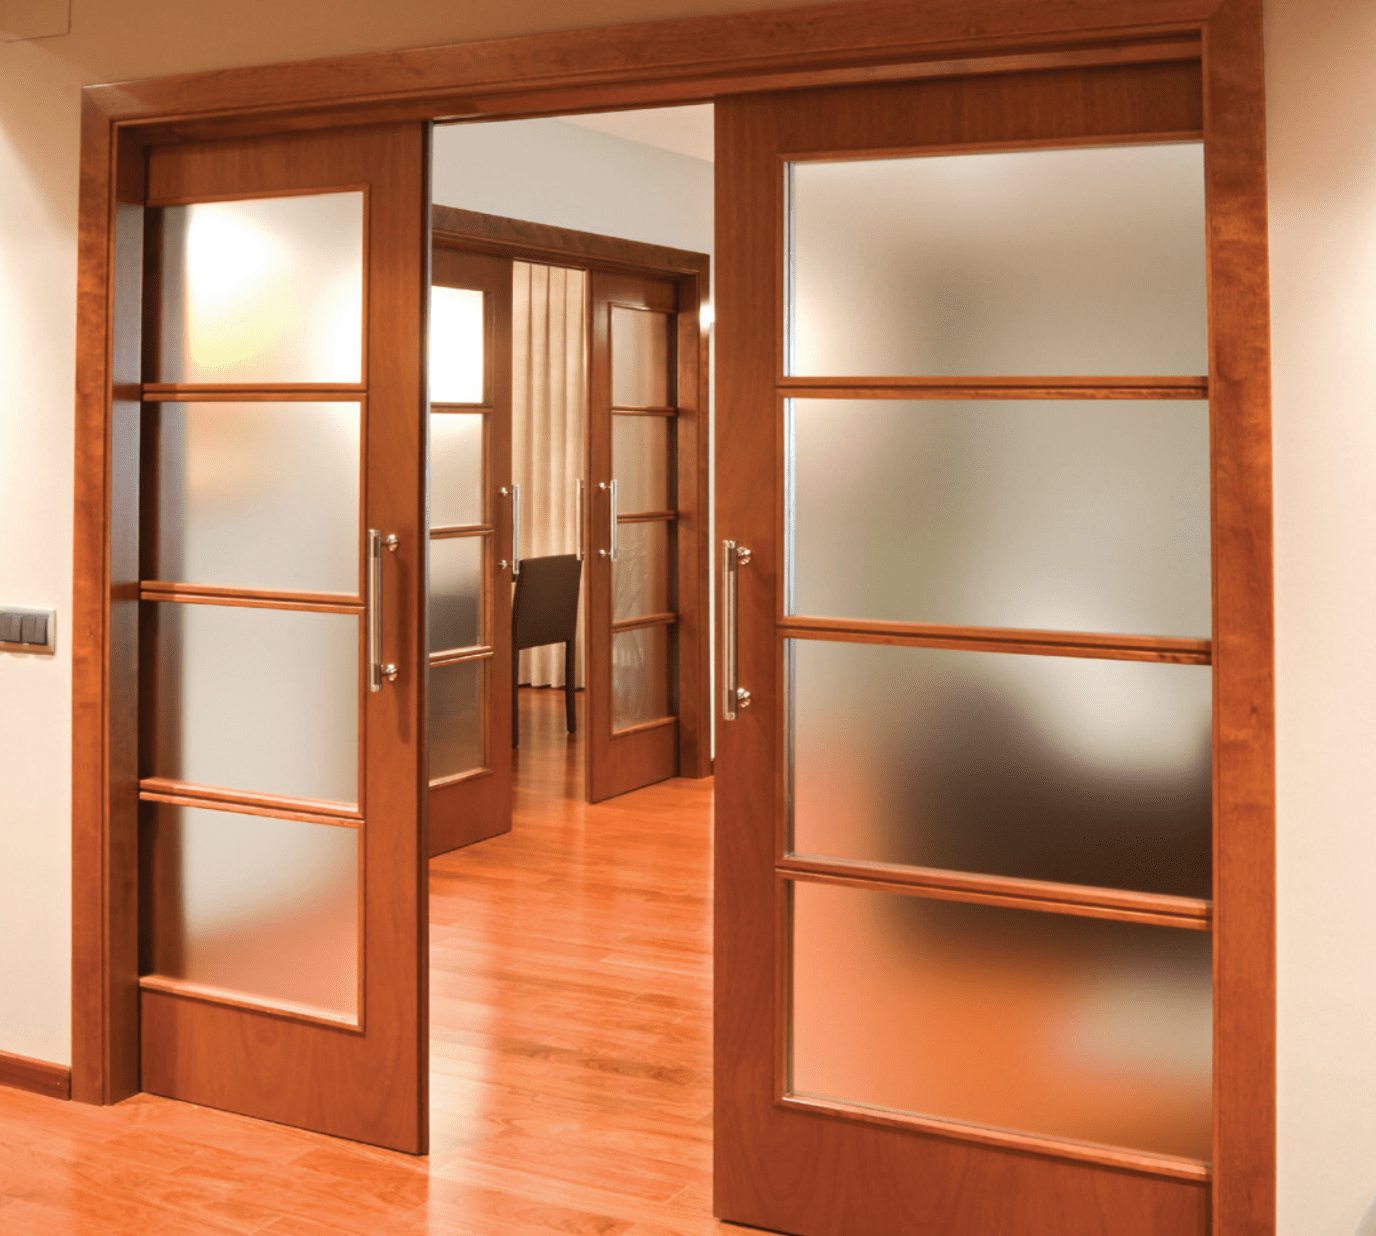 The SDR-RA80SYN Synchronized Sliding Door System uses synchronized linear motion guide rails for dynamic, symmetric movement.